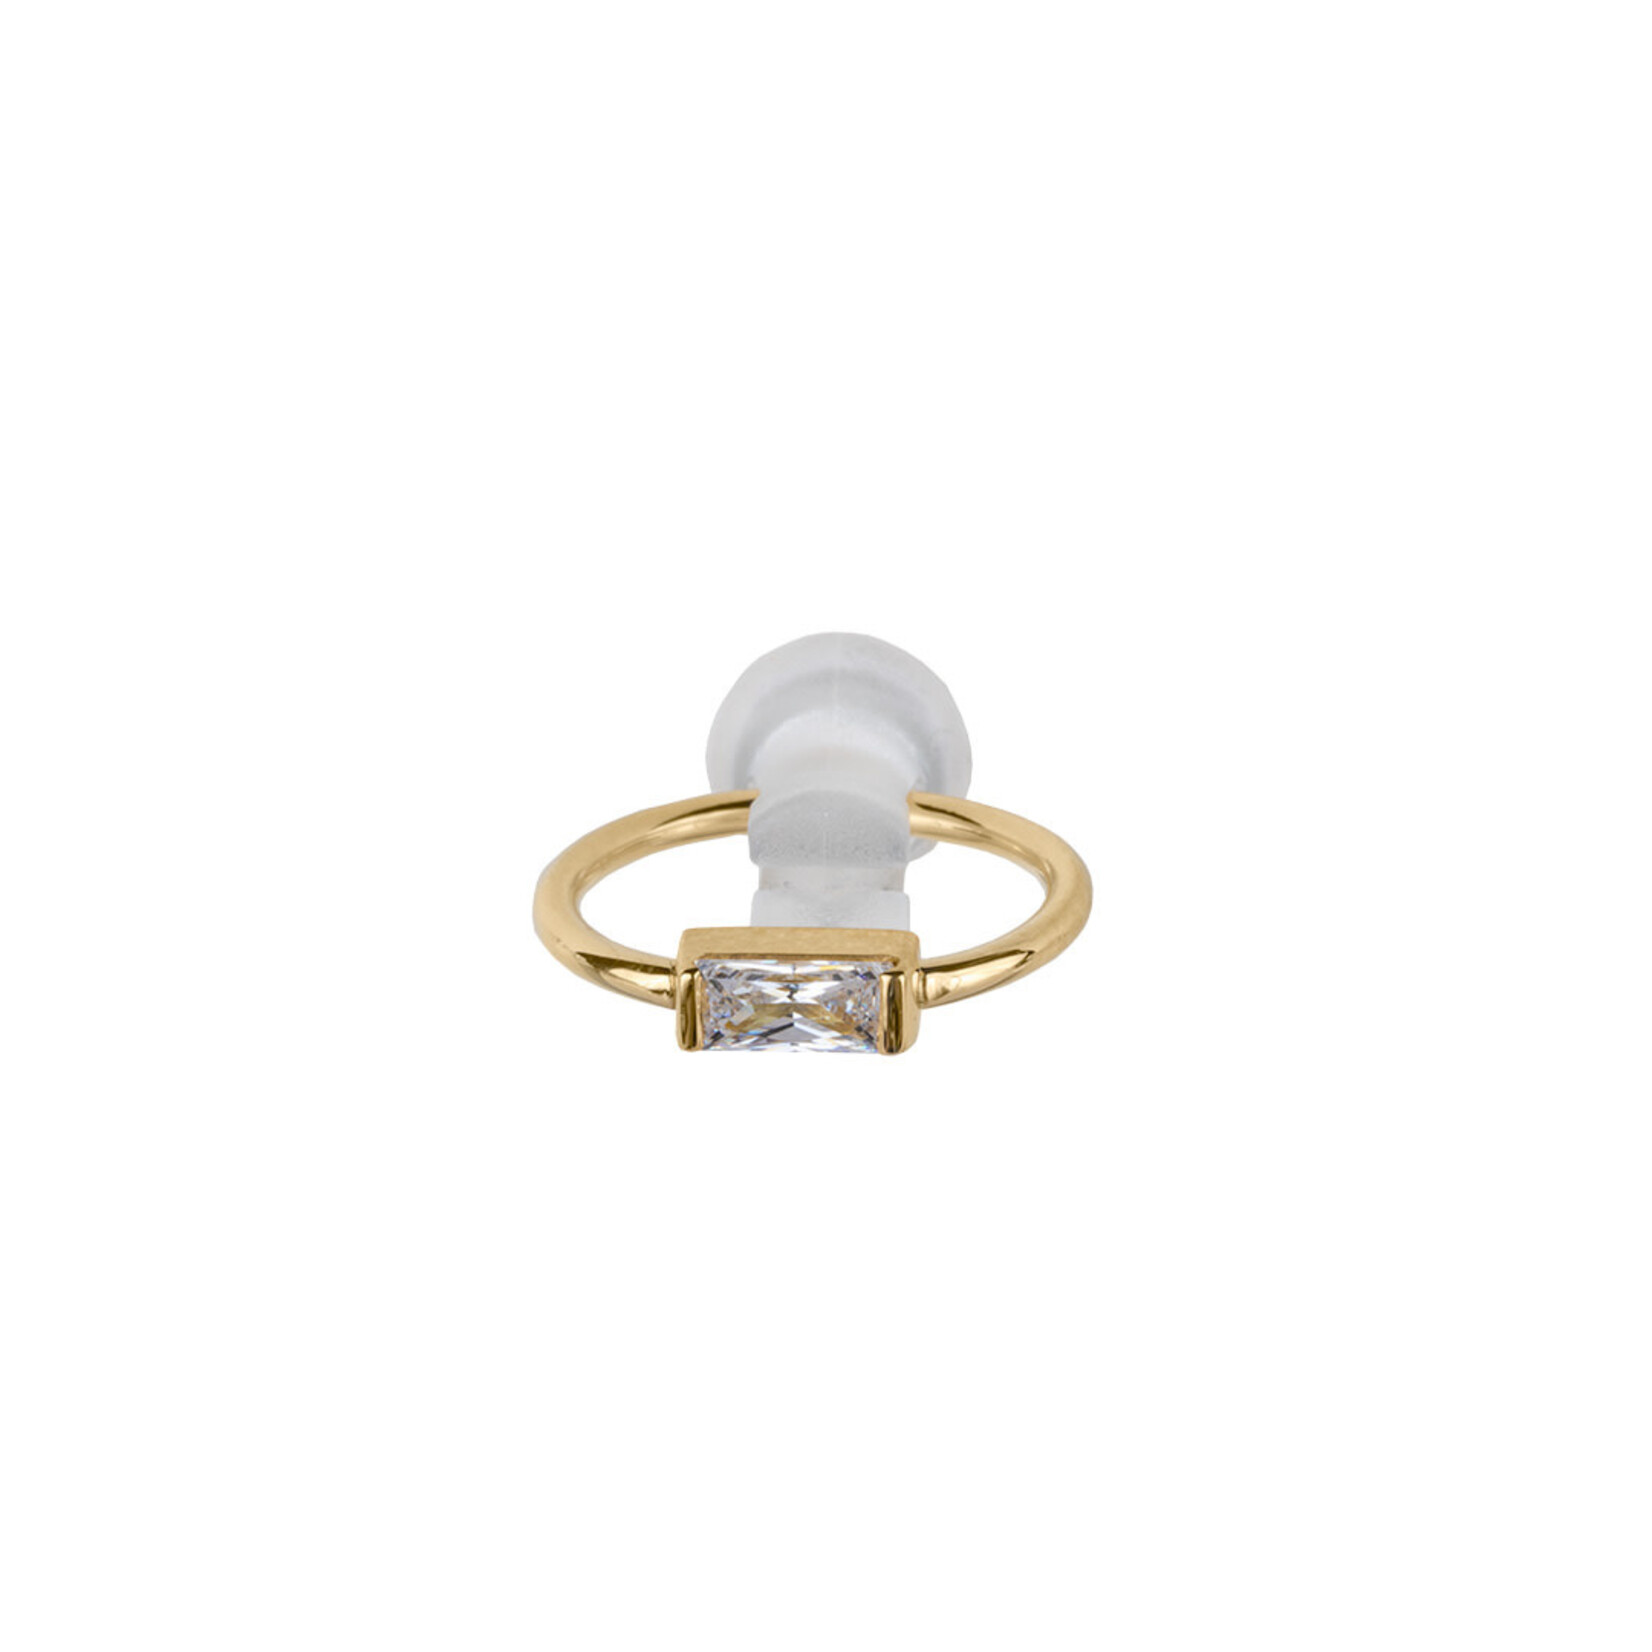 BVLA BVLA 16g Fixed Ring with 3x1.5 baguette CZ